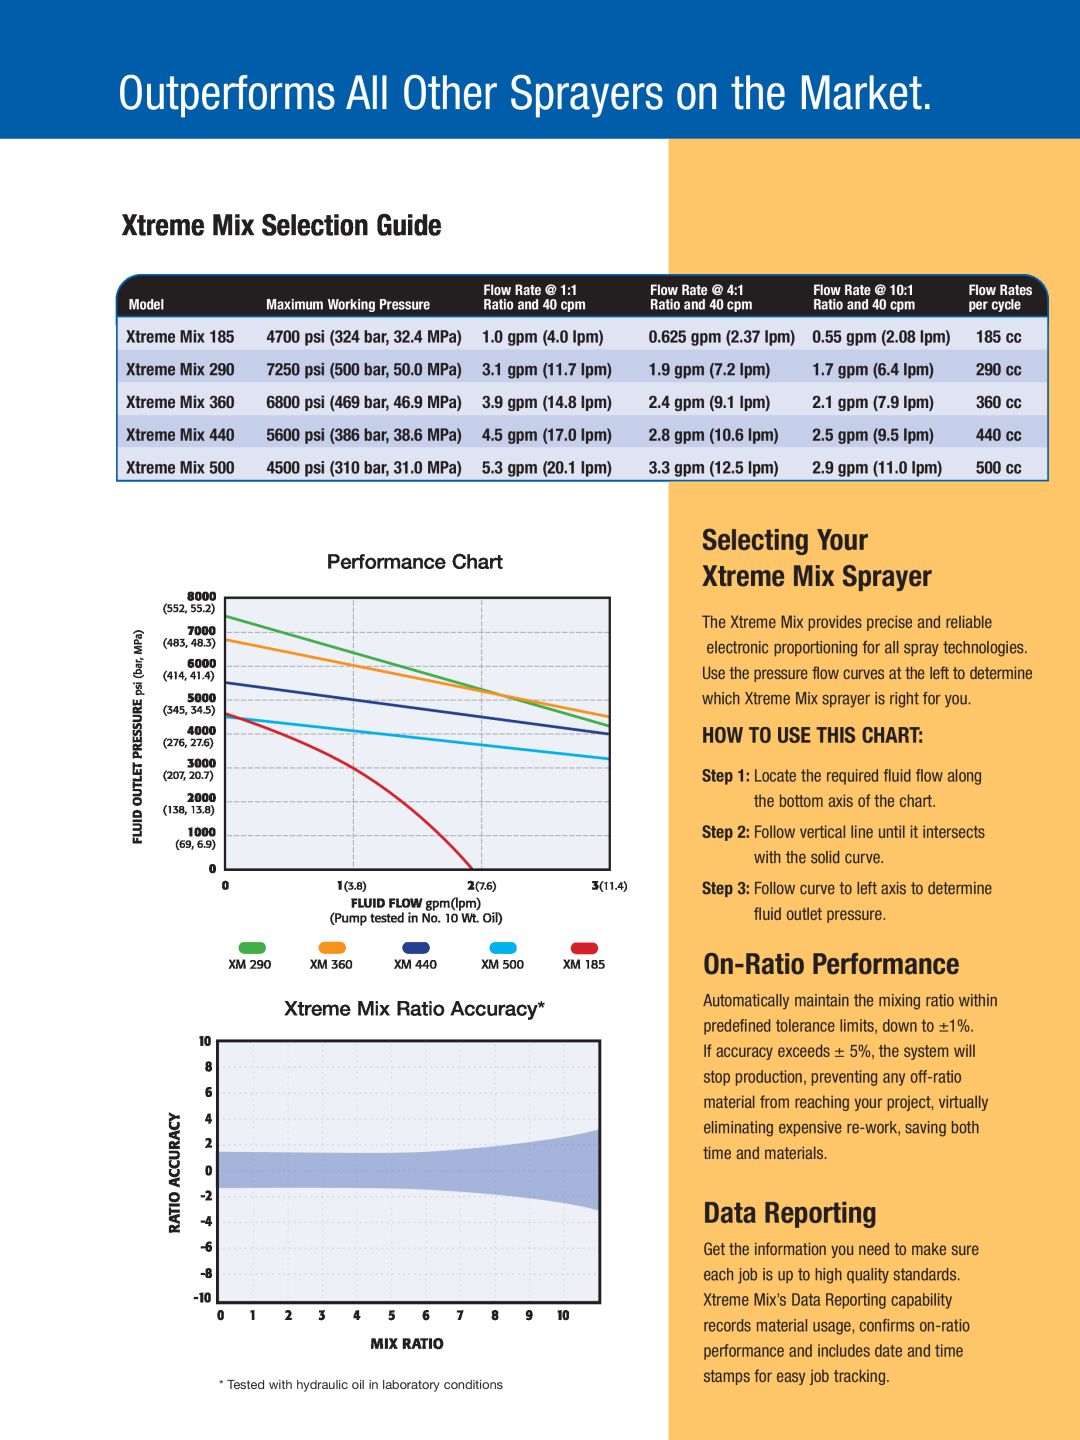 Graco Inc XTR503, 440 Xtreme Mix Selection Guide, Selecting Your Xtreme Mix Sprayer, On-Ratio Performance, Data Reporting 